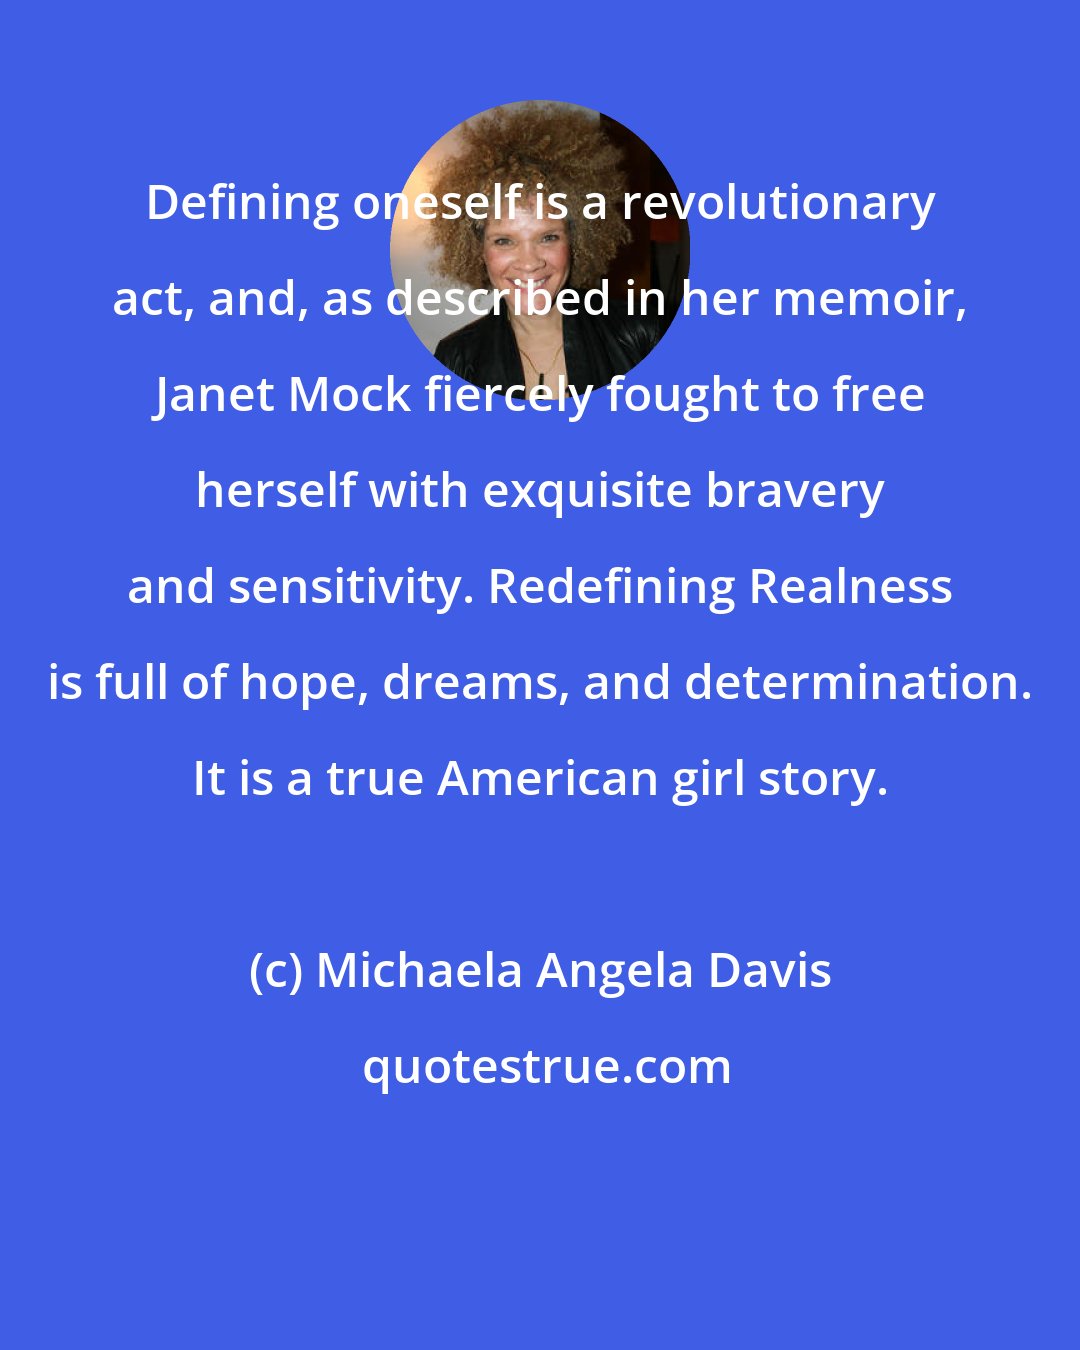 Michaela Angela Davis: Defining oneself is a revolutionary act, and, as described in her memoir, Janet Mock fiercely fought to free herself with exquisite bravery and sensitivity. Redefining Realness is full of hope, dreams, and determination. It is a true American girl story.